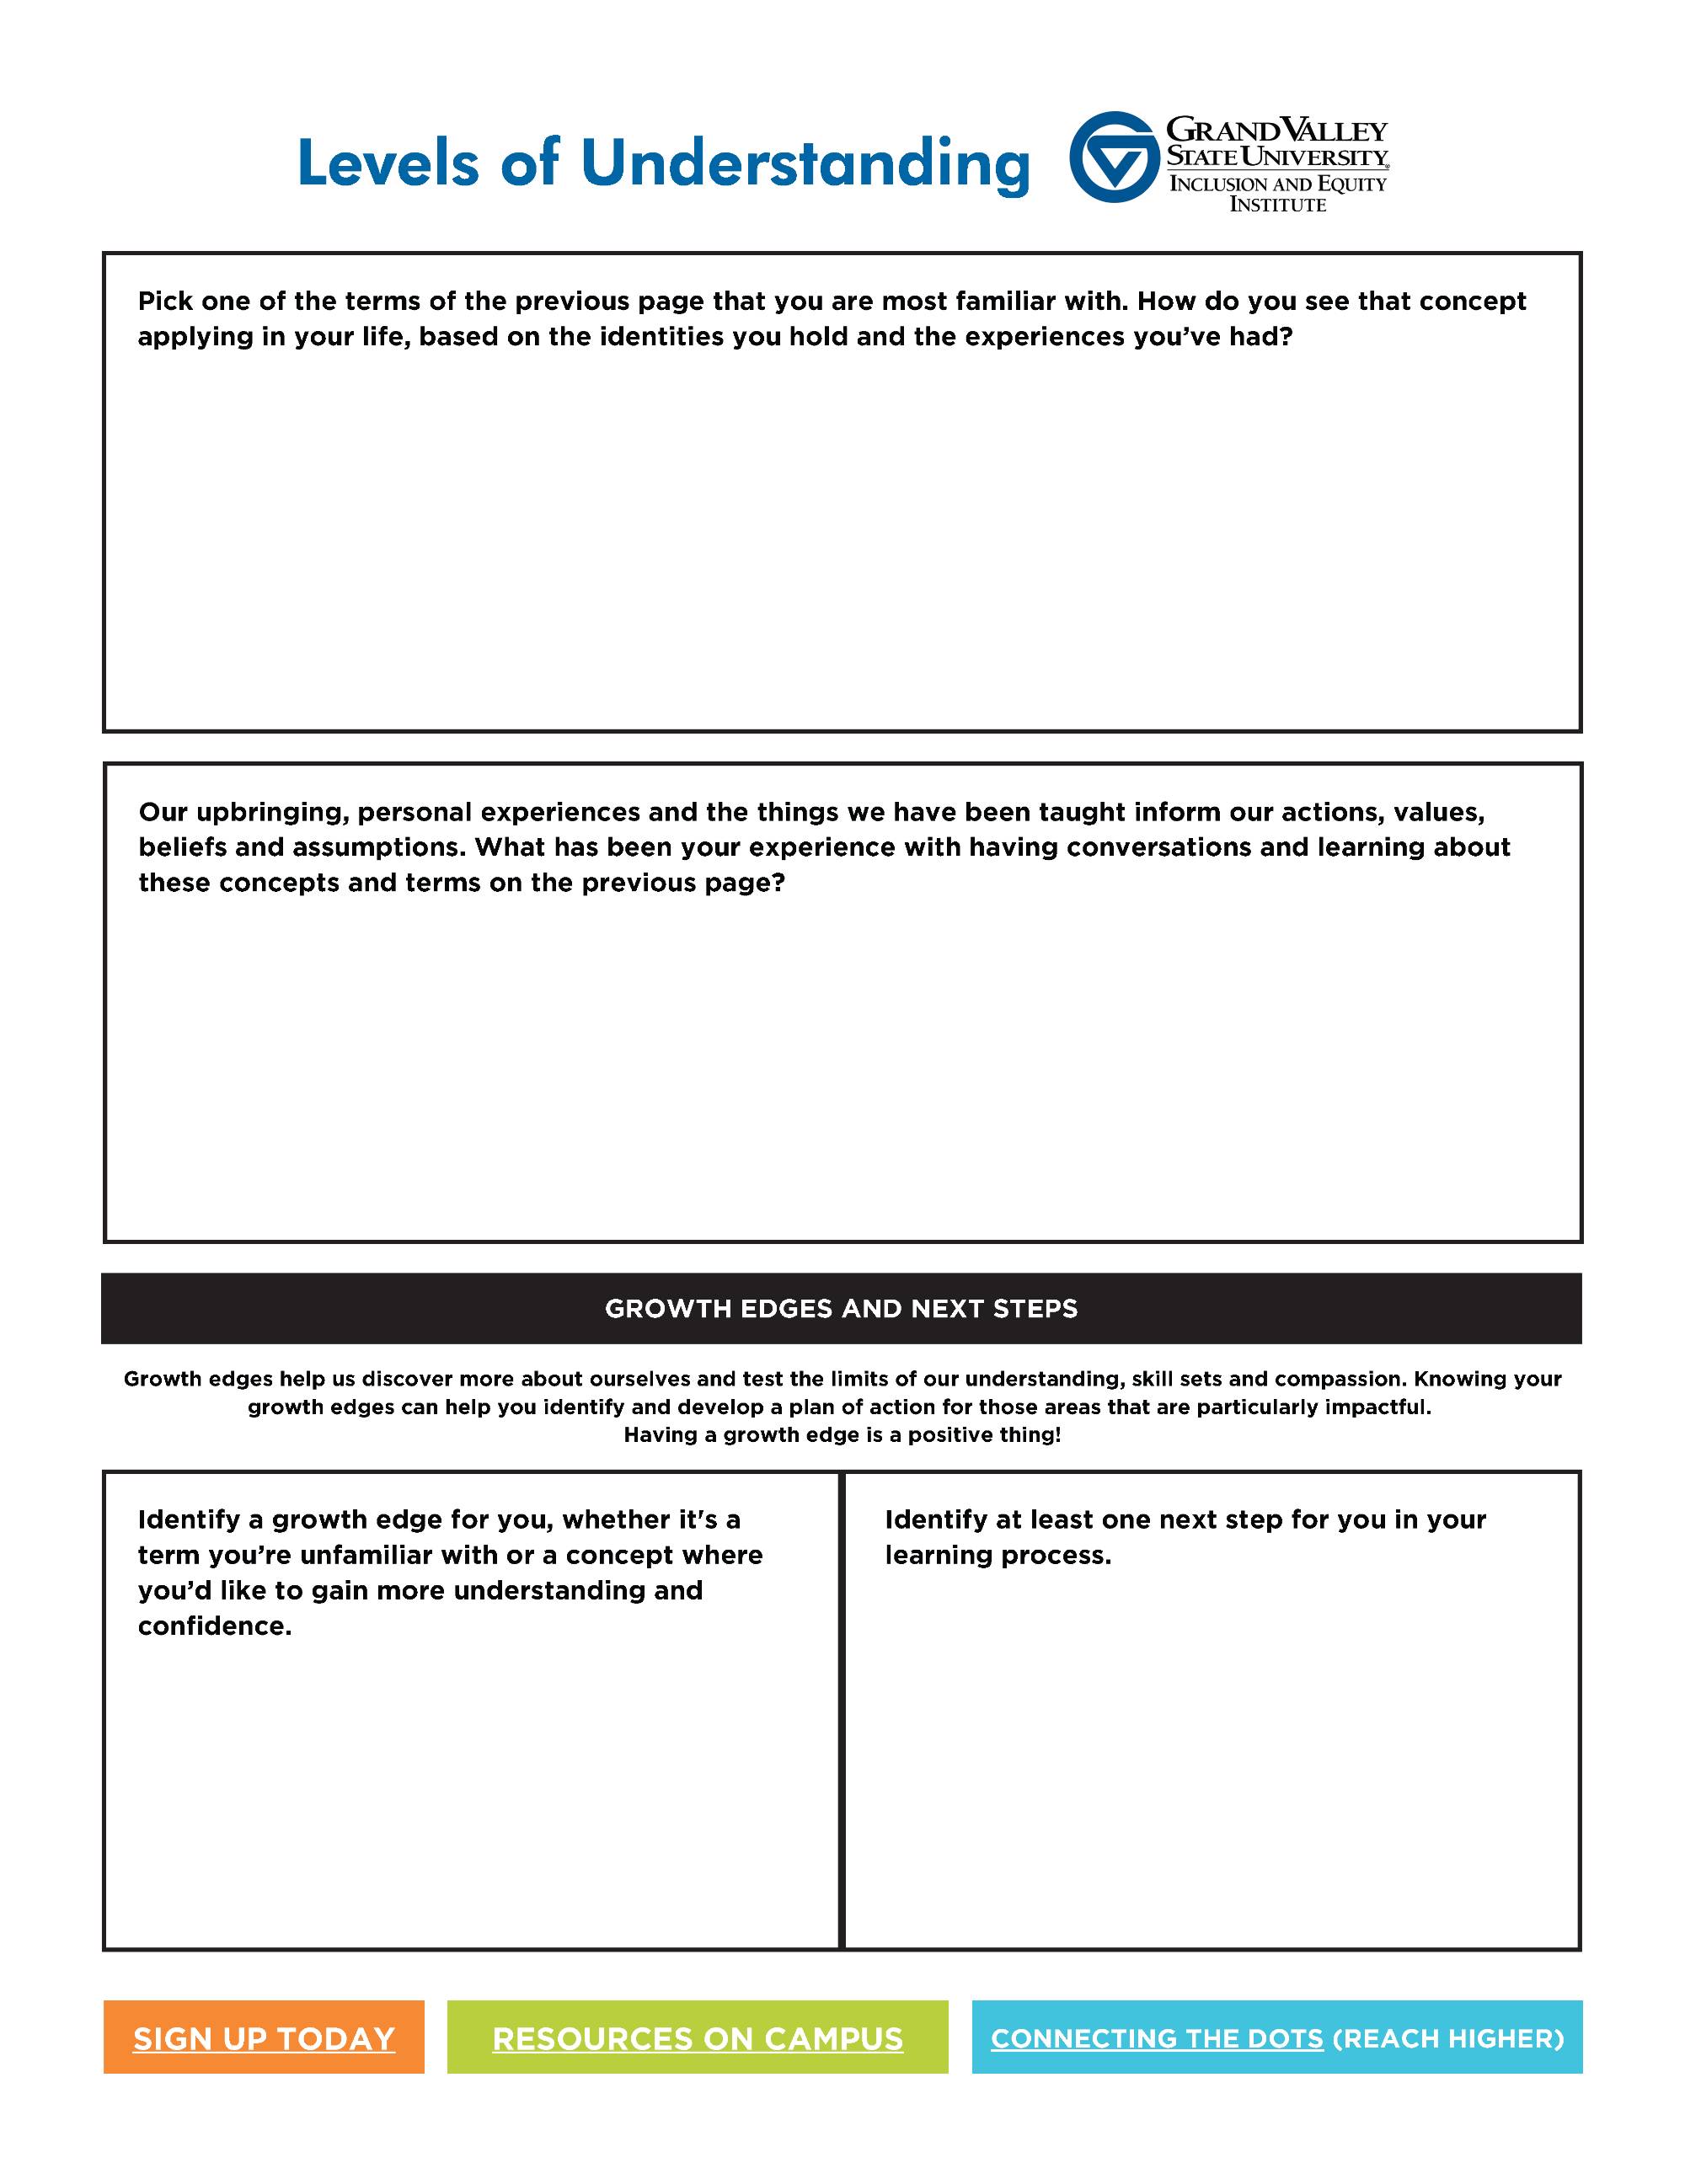 Levels of Understanding PDF Page 2